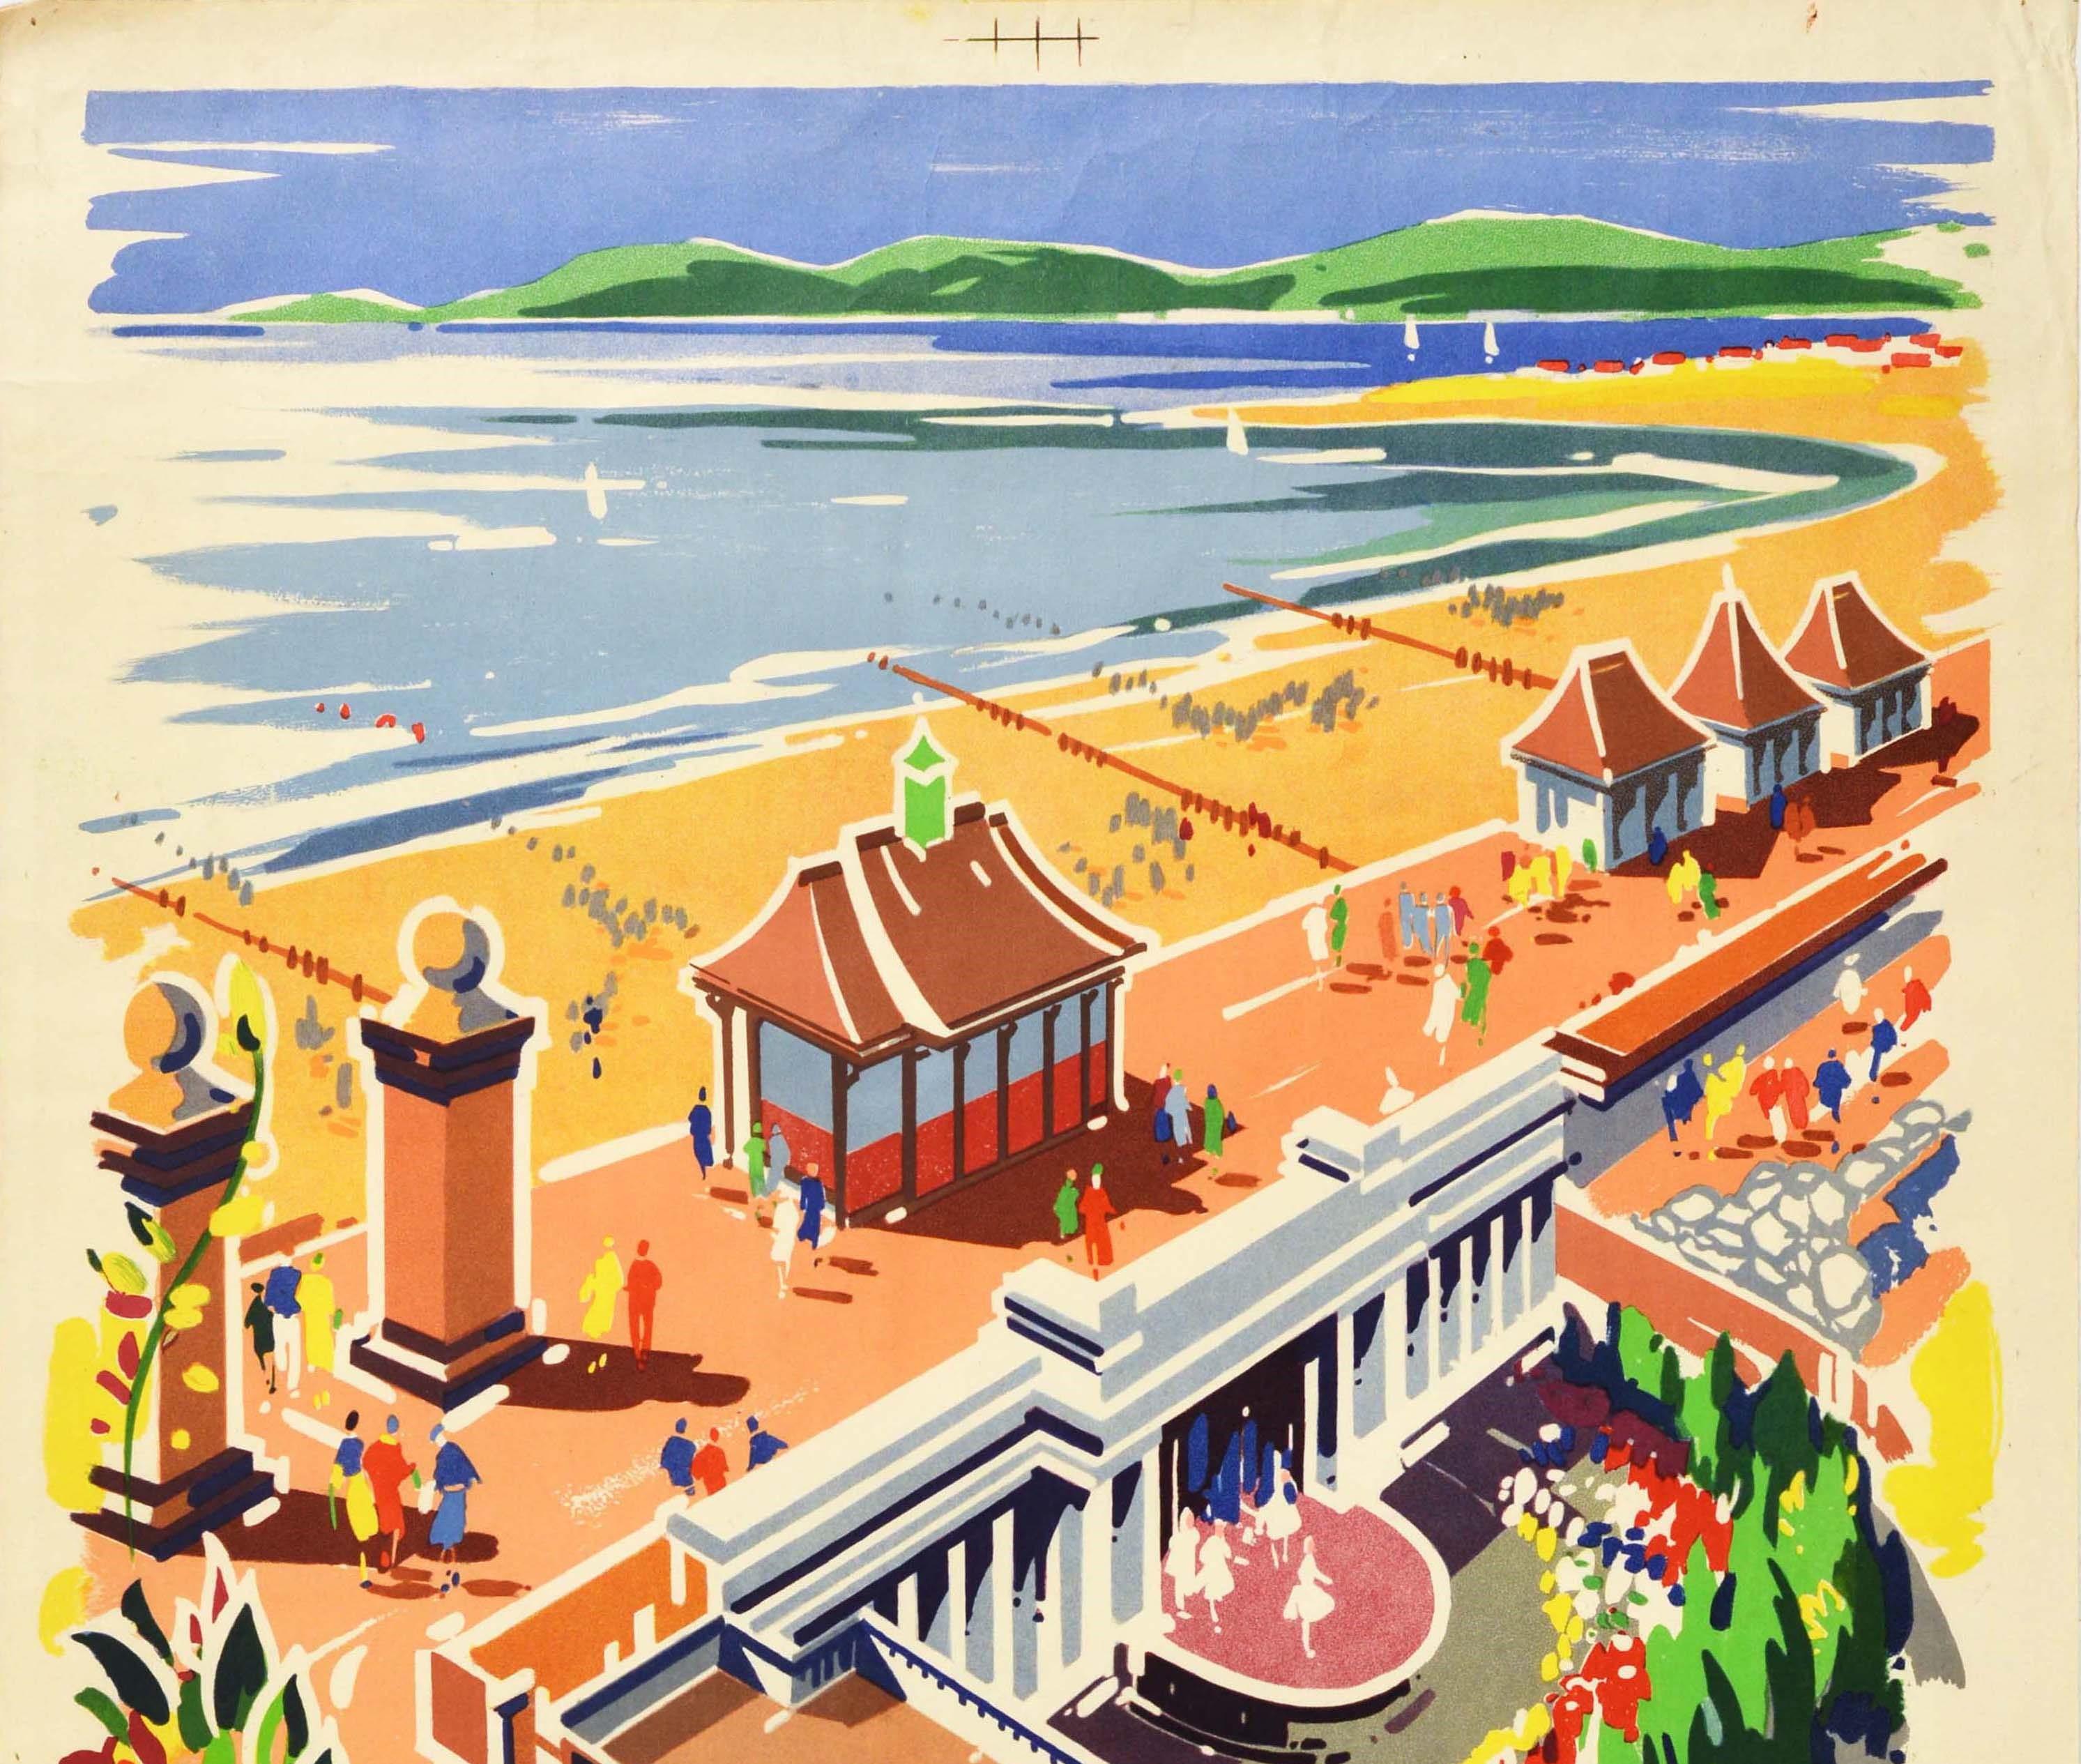 Original vintage travel poster issued by British Railways for Thornton Cleveleys on the Lancashire Coast featuring a colourful view of the seaside promenade with people walking around the formal gardens and enjoying a sunny day by the large sandy